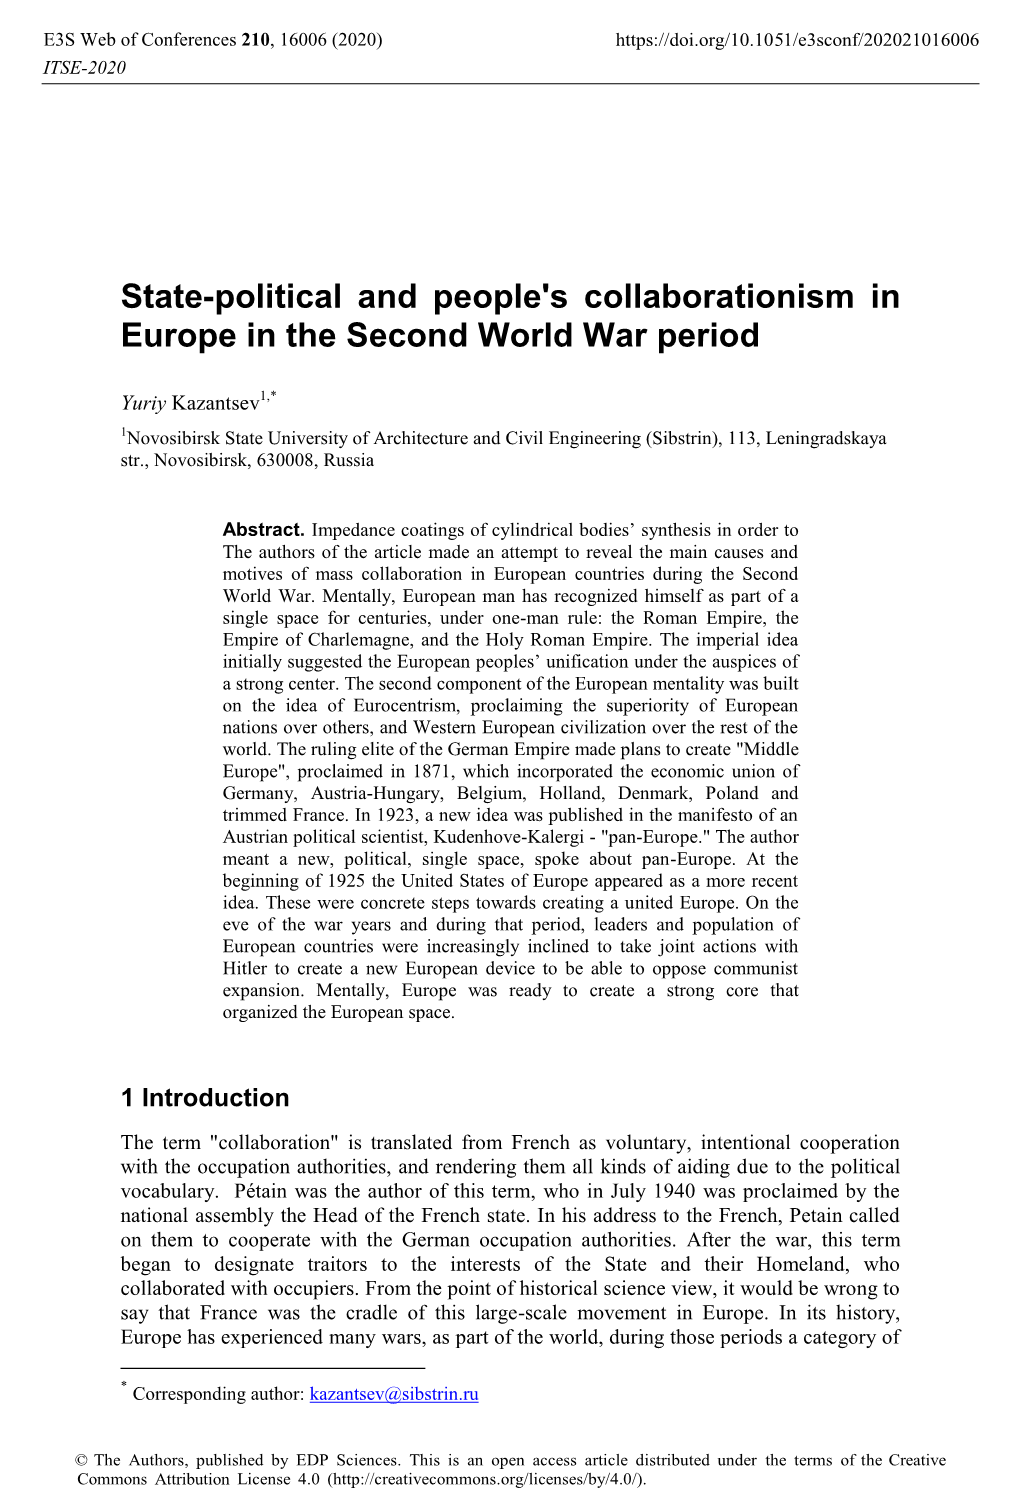 S Collaborationism in Europe in the Second World War Period